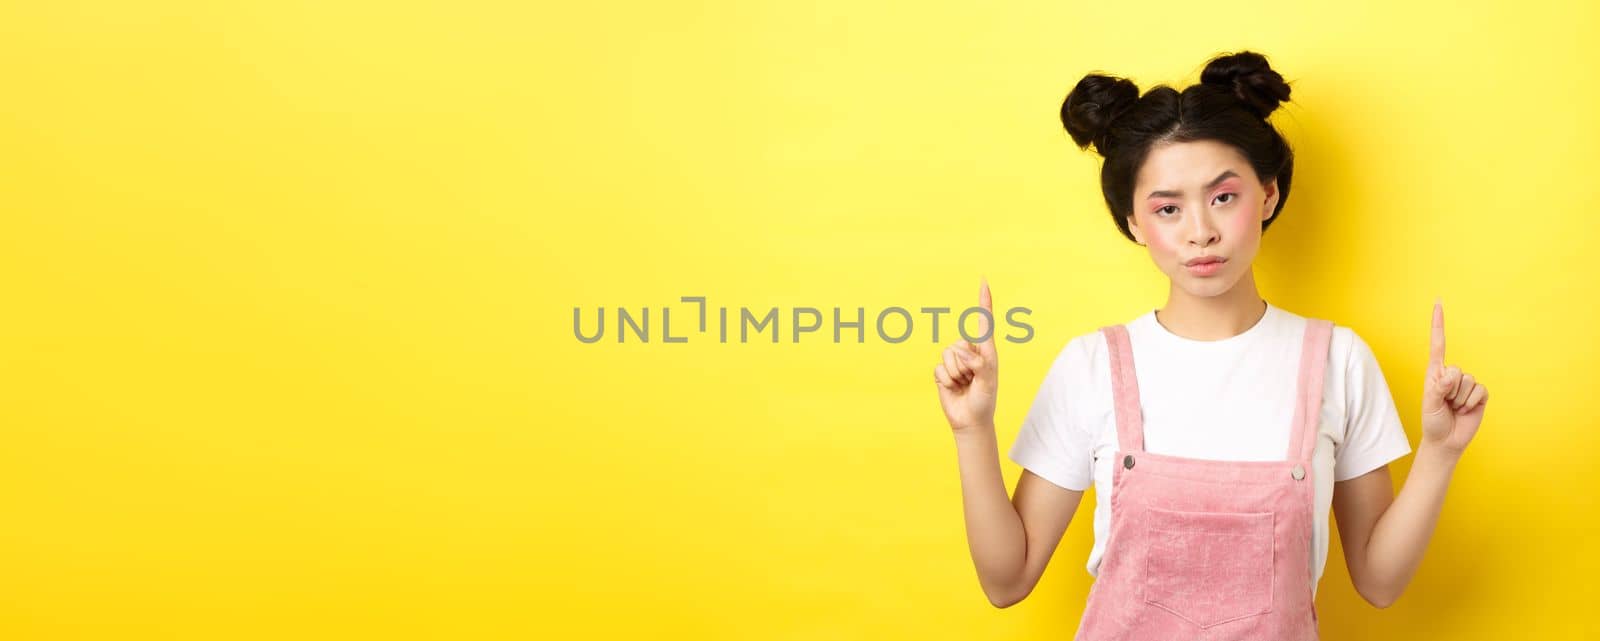 Annoyed and tired asian girl with pink glamour makeup, pointing fingers up and look bothered, standing on yellow background.